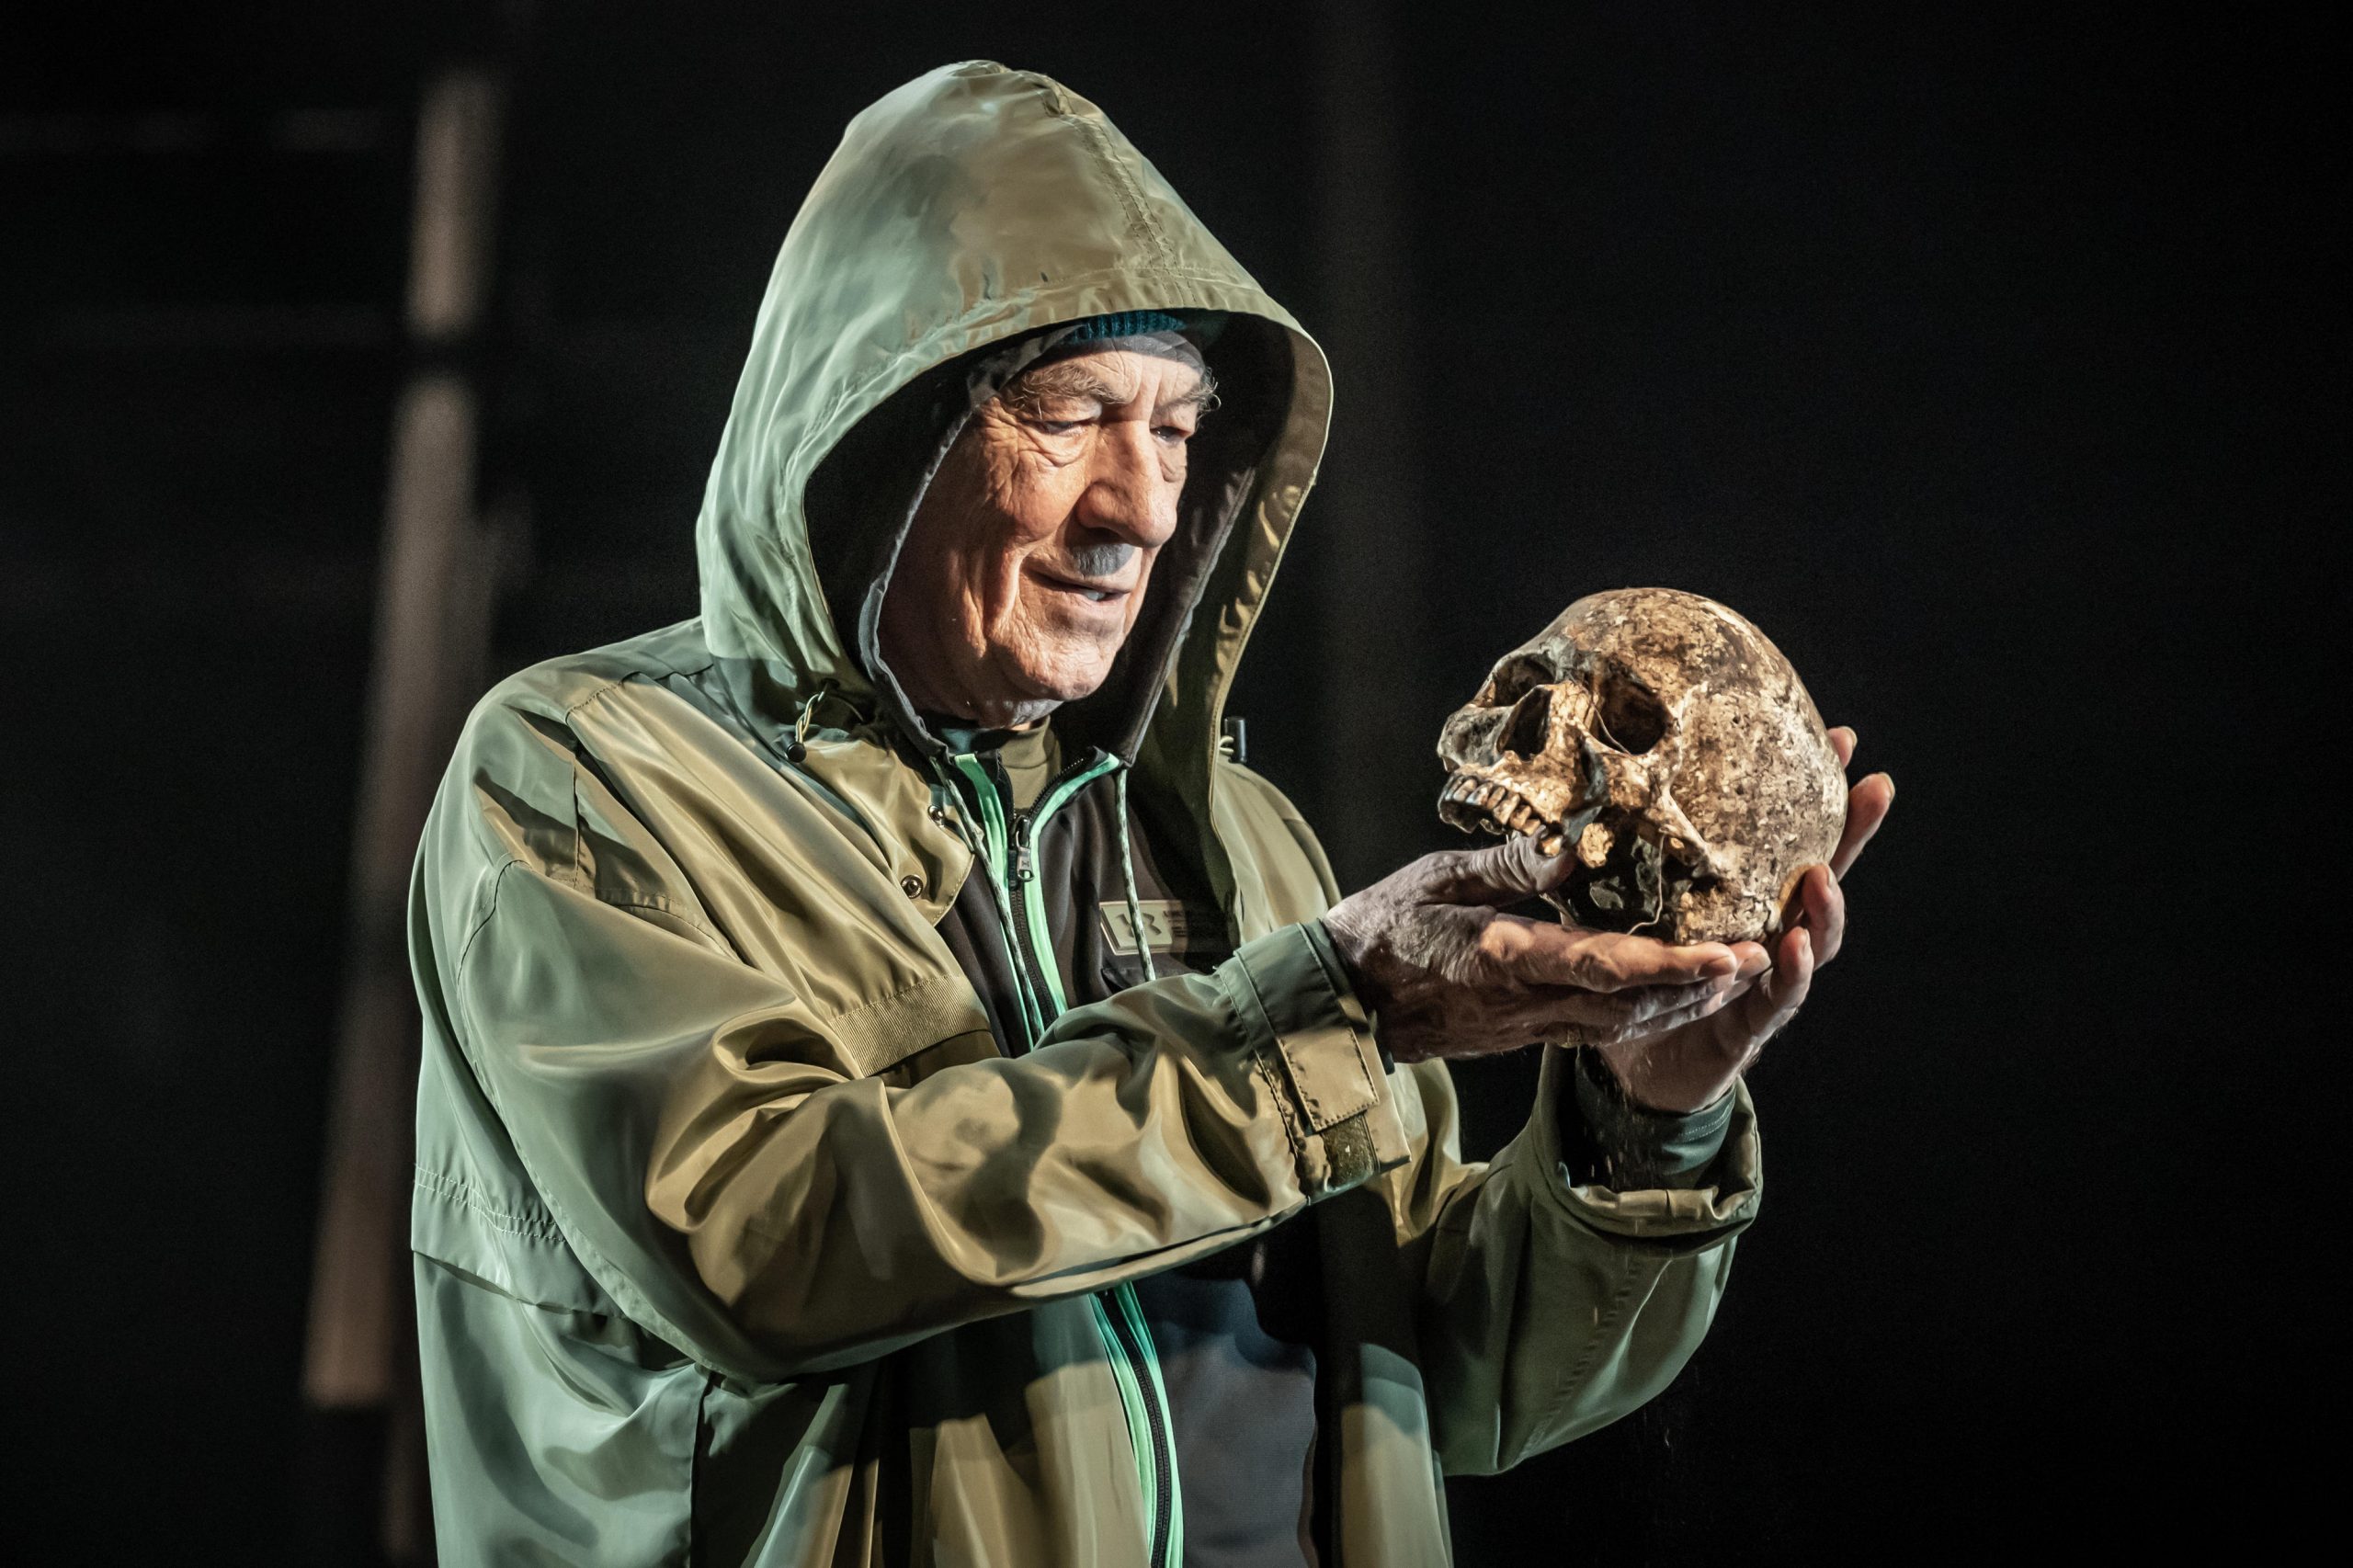 The great Ian McKellen contemplates mortality (and Yorick’s skull) in his age-blind Hamlet .